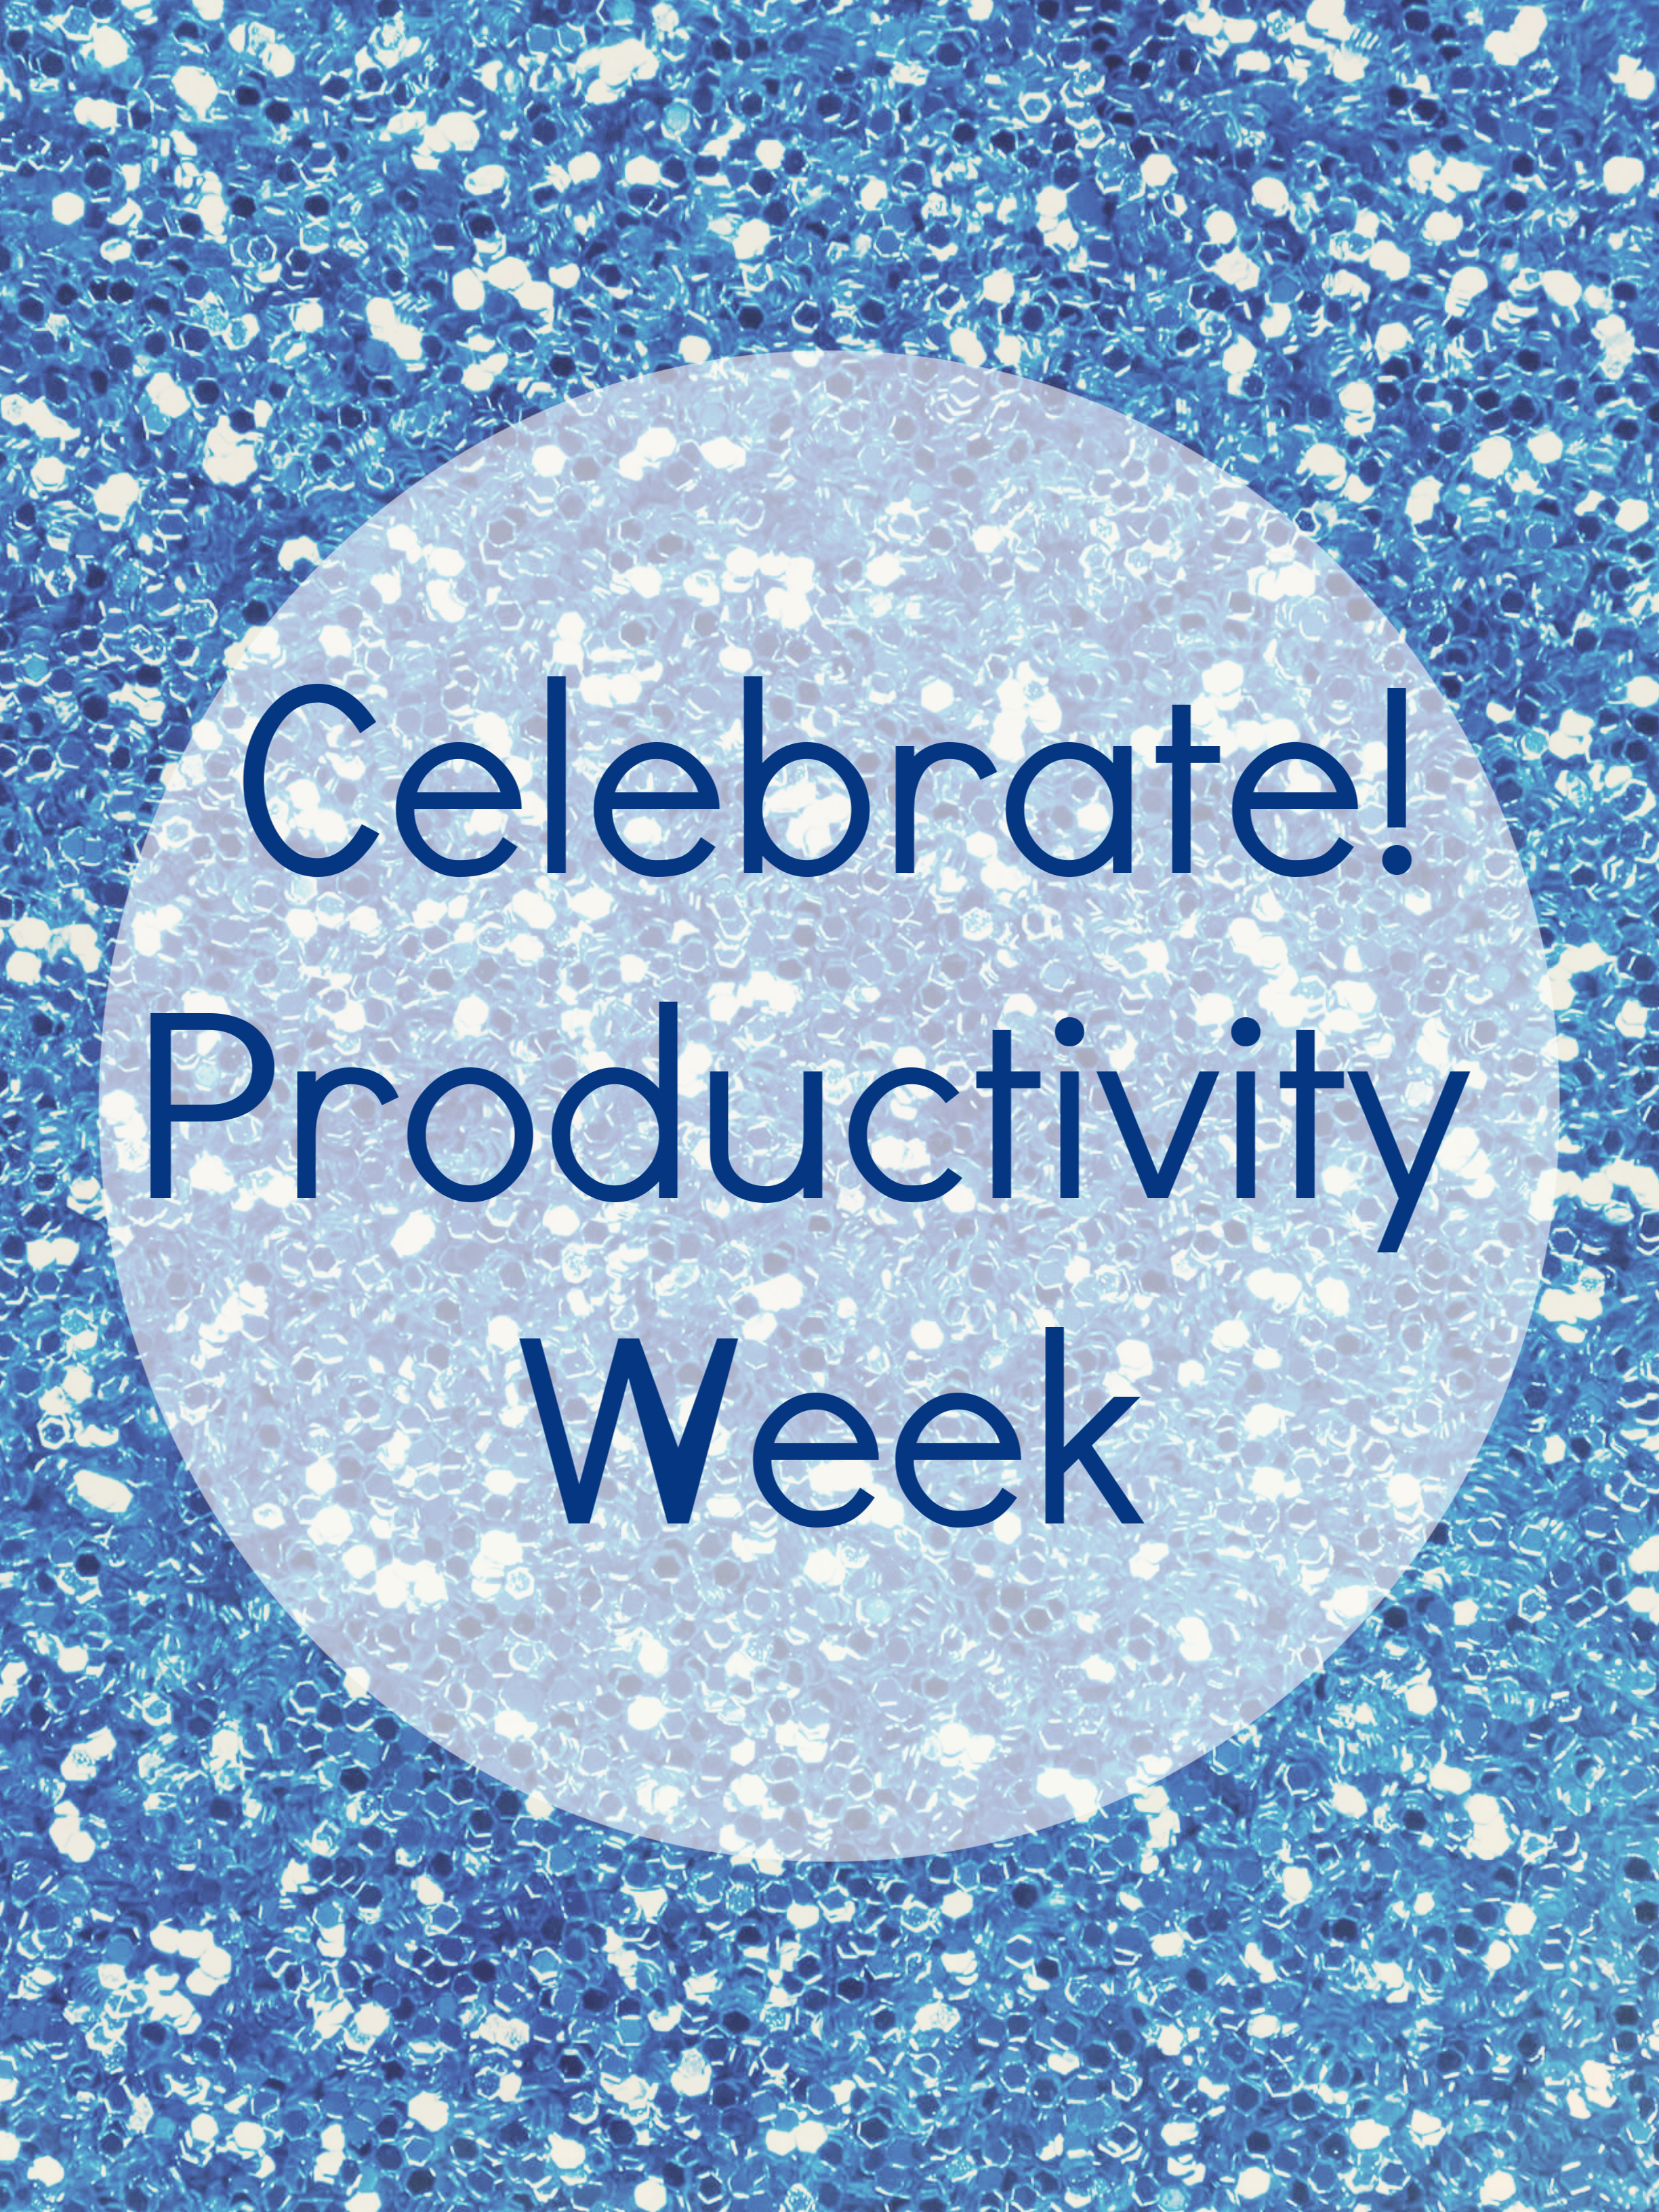 Productivity Week happens in January each year. Celebrate with Wave Productivity.